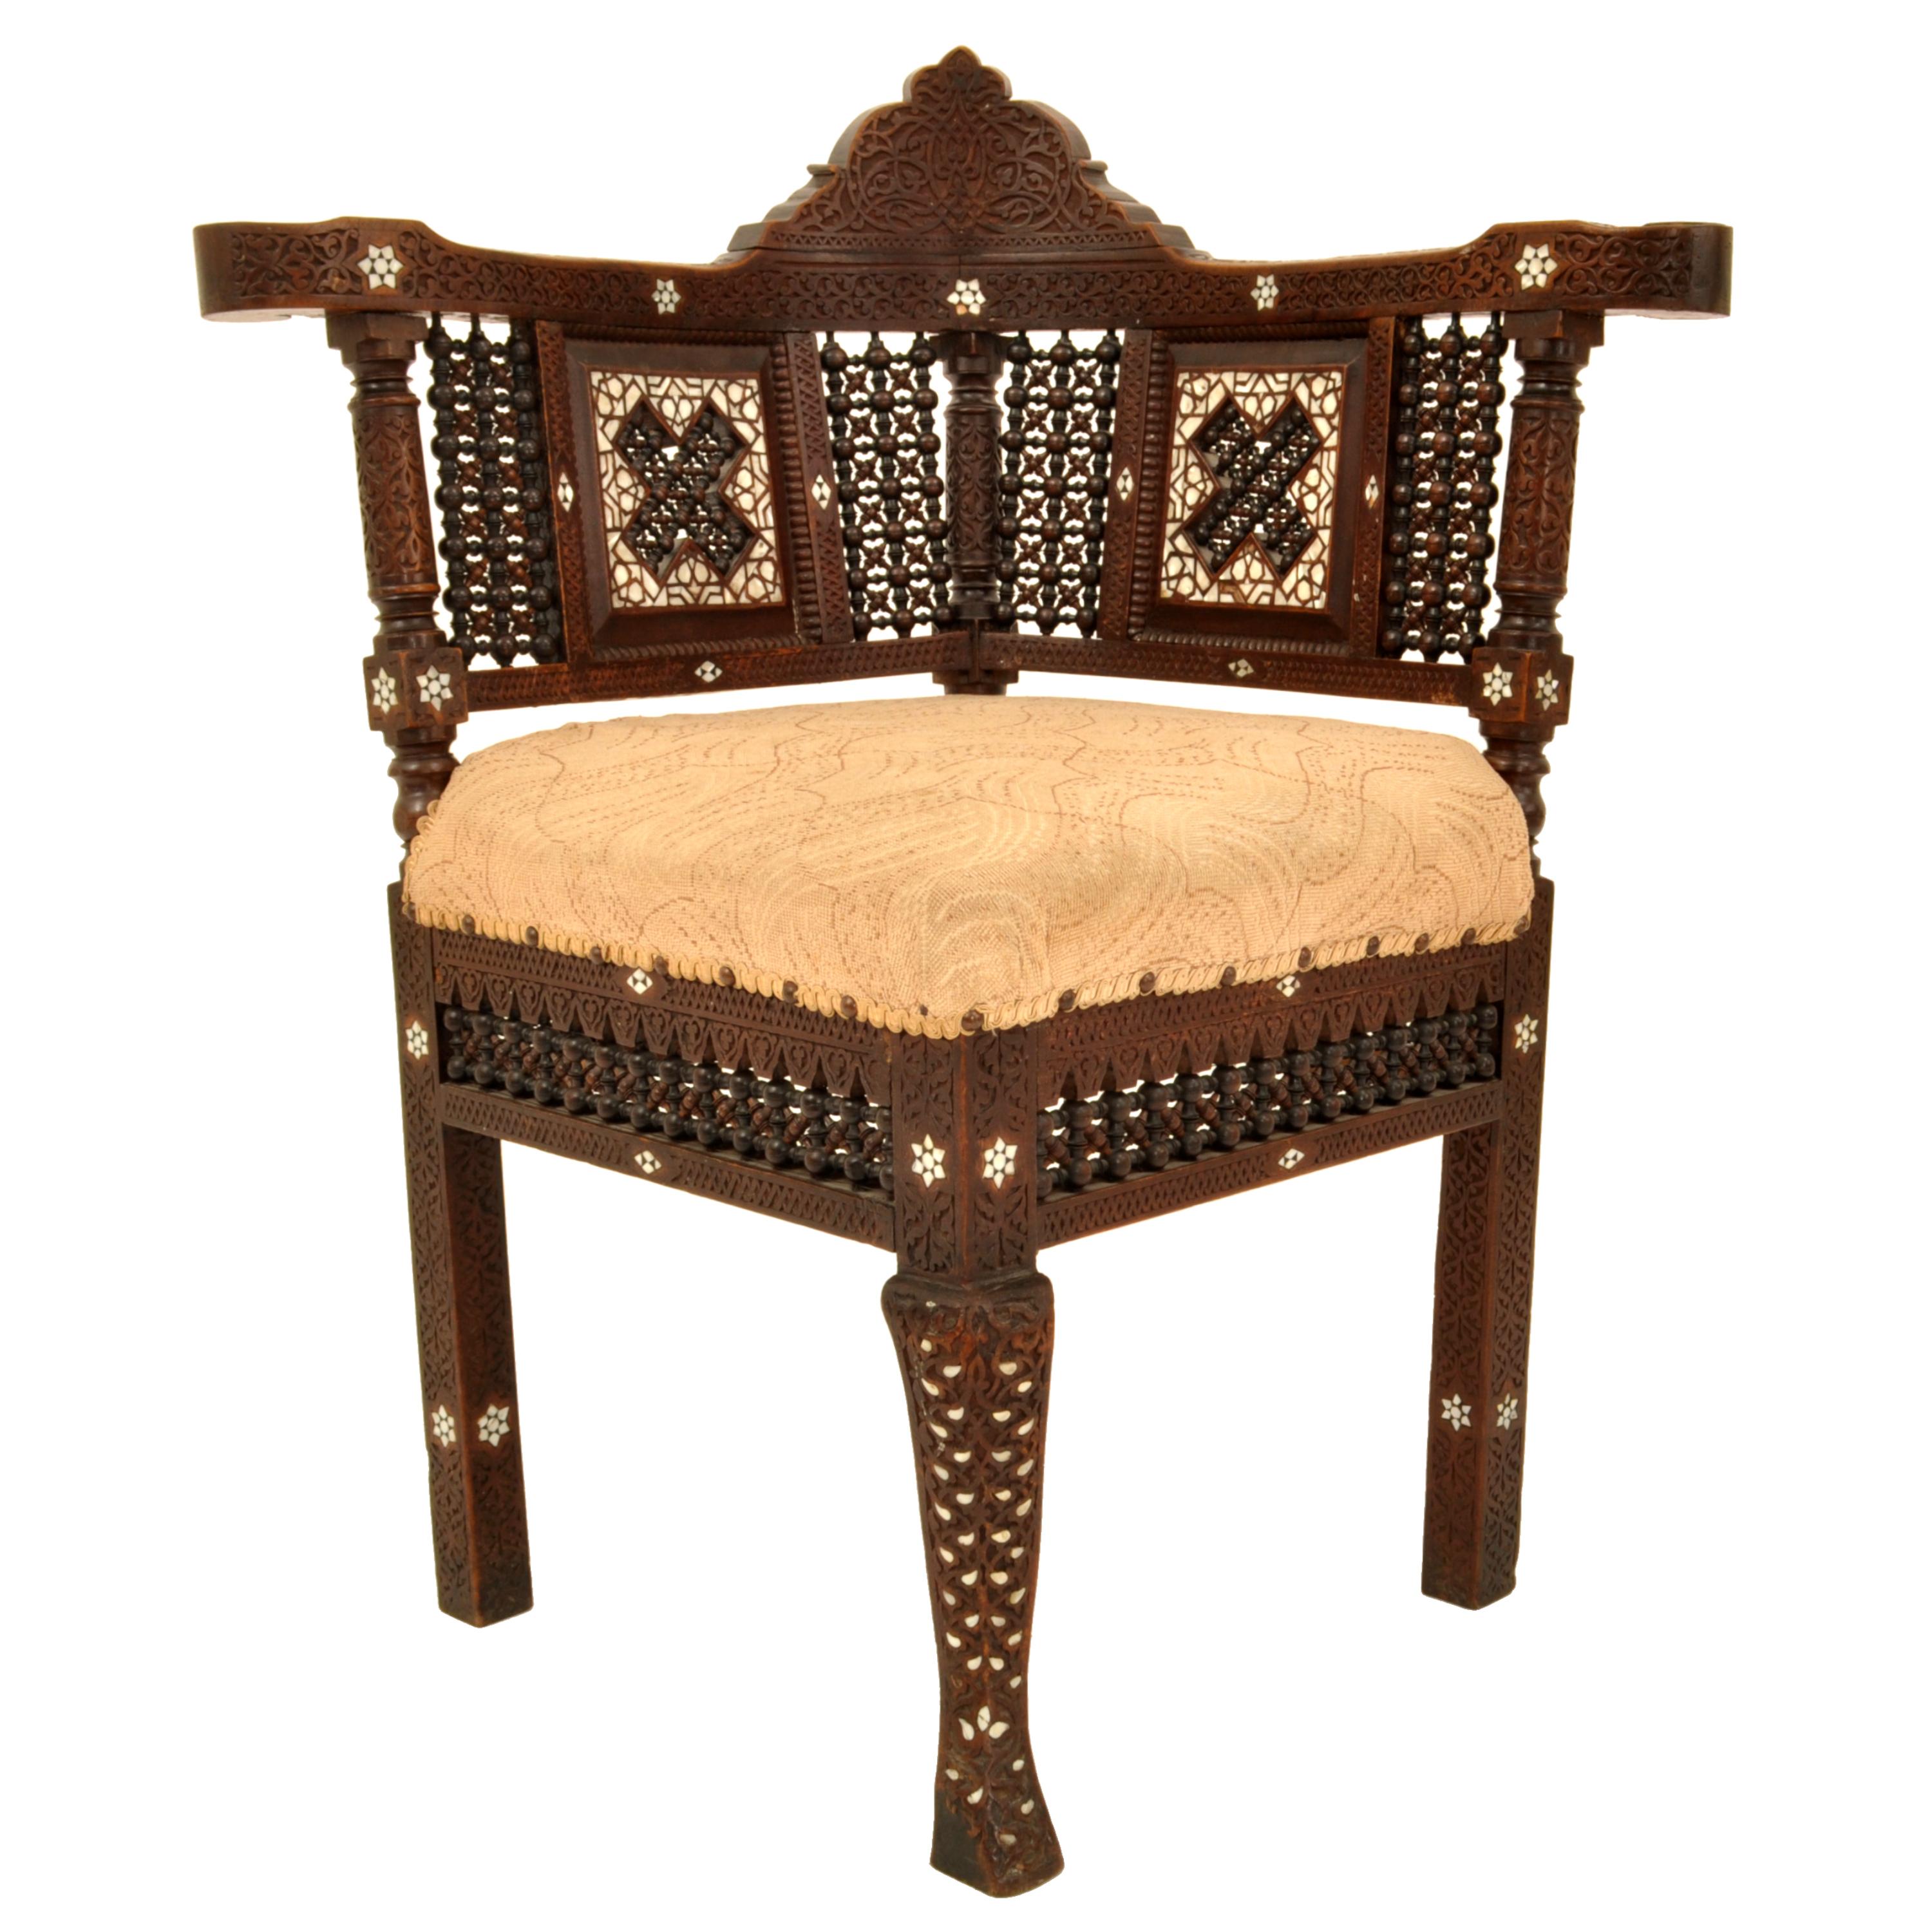 Antique Islamic Moorish Syrian Carved Inlaid Mother of Pearl Corner Chair 1880 For Sale